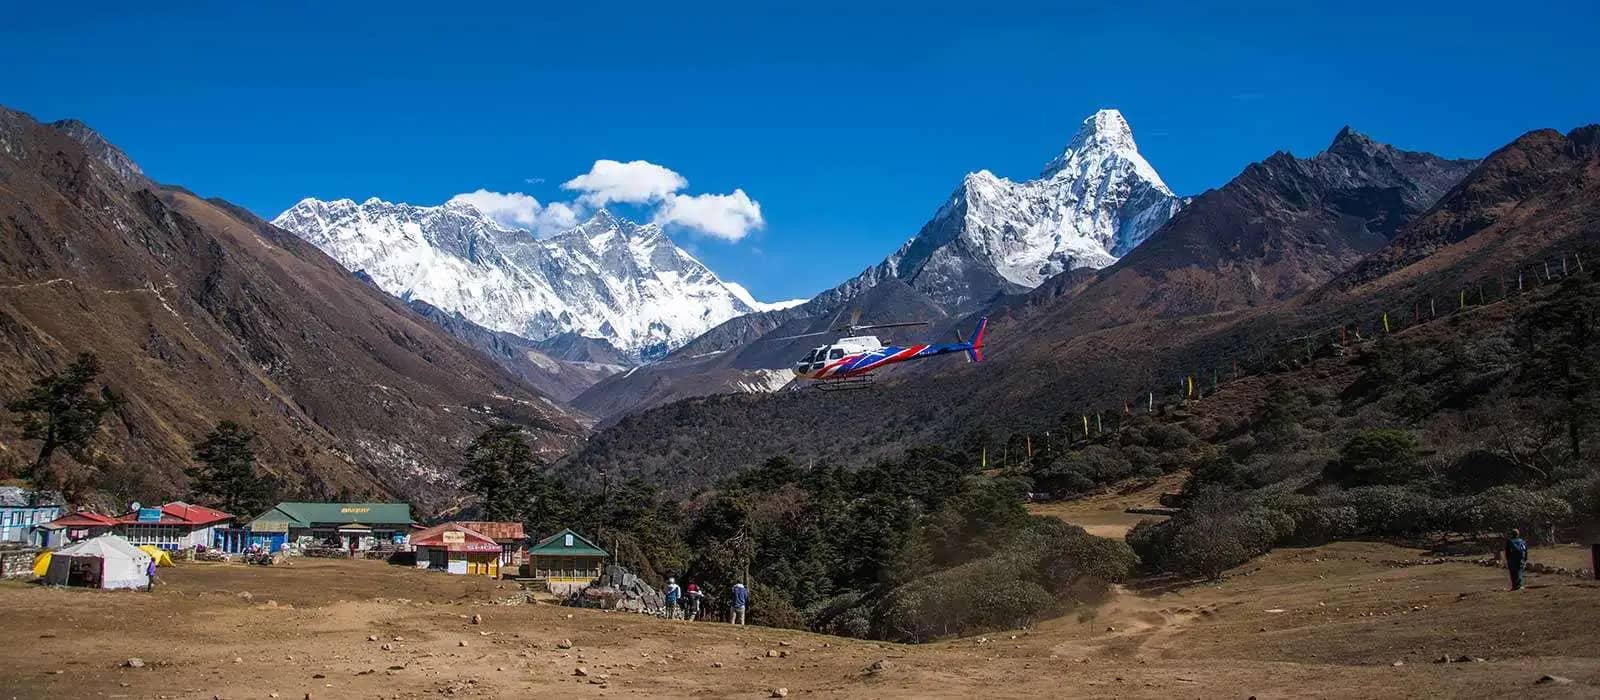 Everest Base Camp Trek and Fly back by helicopter